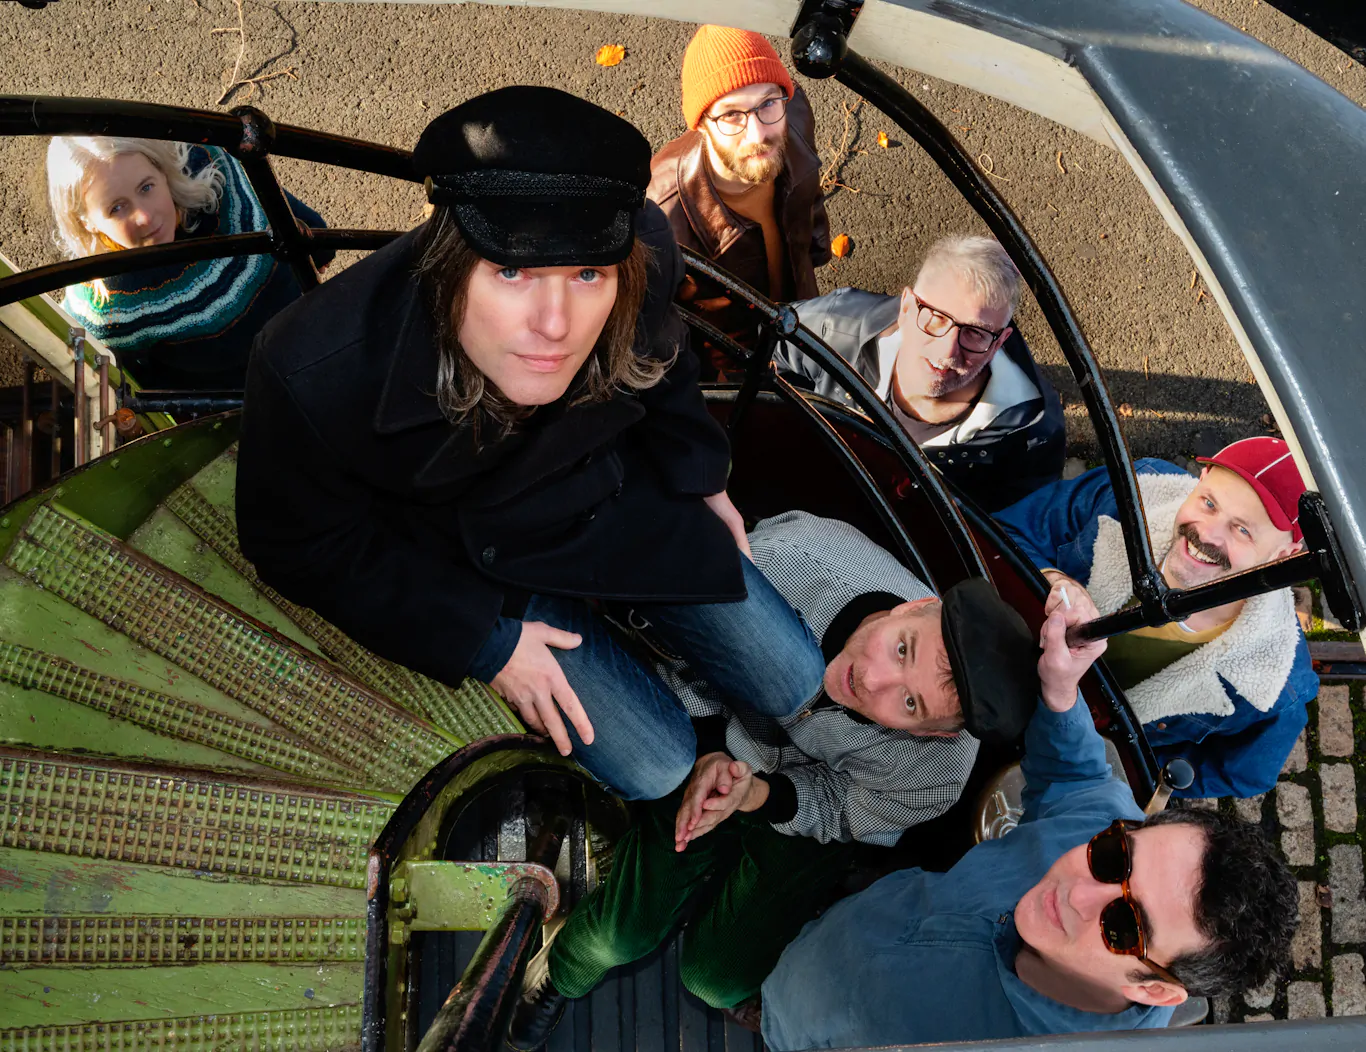 BELLE AND SEBASTIAN release standalone video and single ‘A Bit Of Previous’